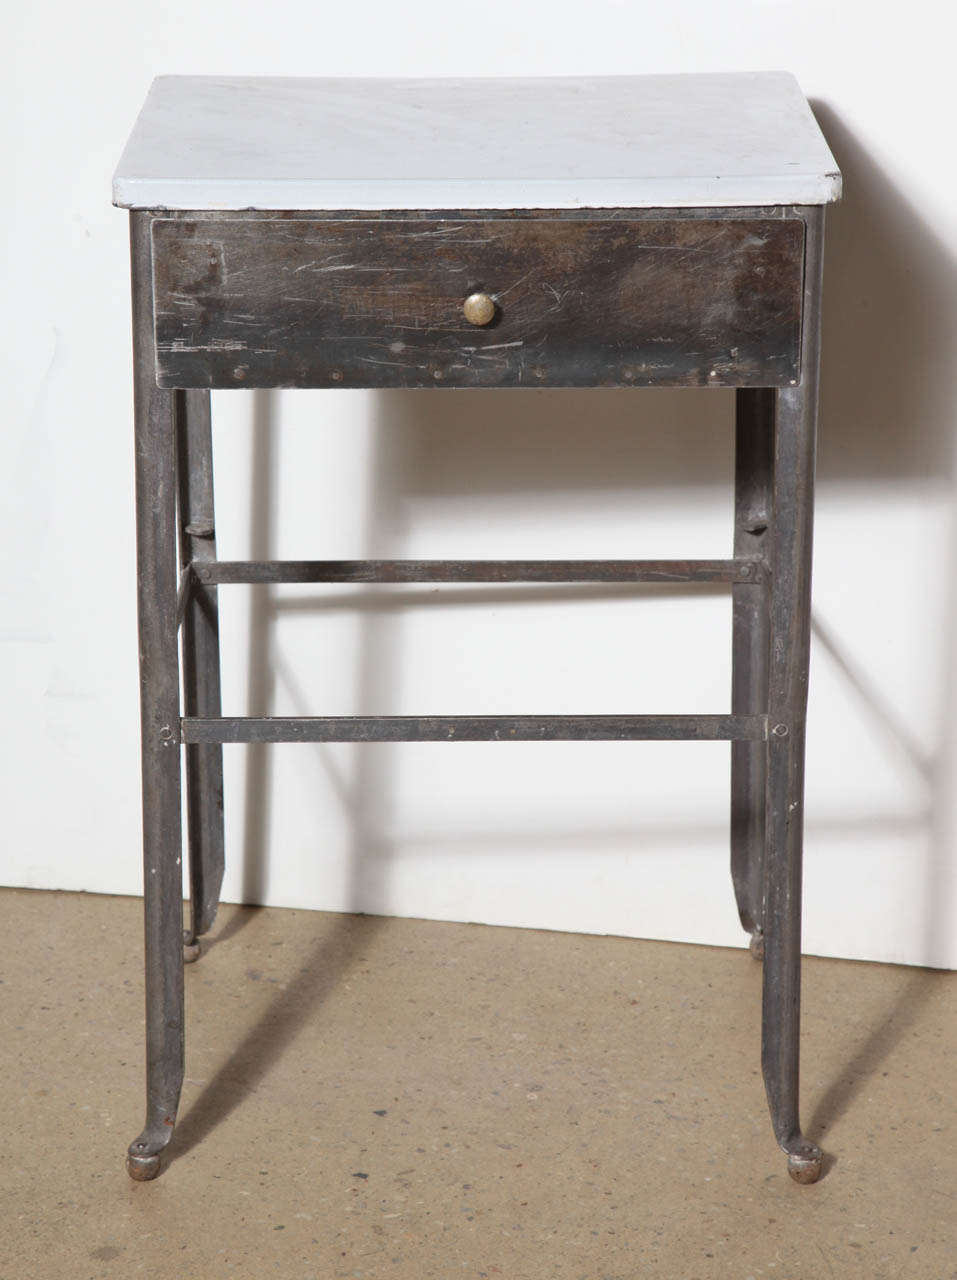 early 20th Century Night Stand in refinished Steel with White Enamel Top.  Complete with Steel Drawer, round Brass pull and wooden ball feet details.  Open base with supports for lower shelf.  Great multi use piece, 
perfect Bathroom, Kitchen or